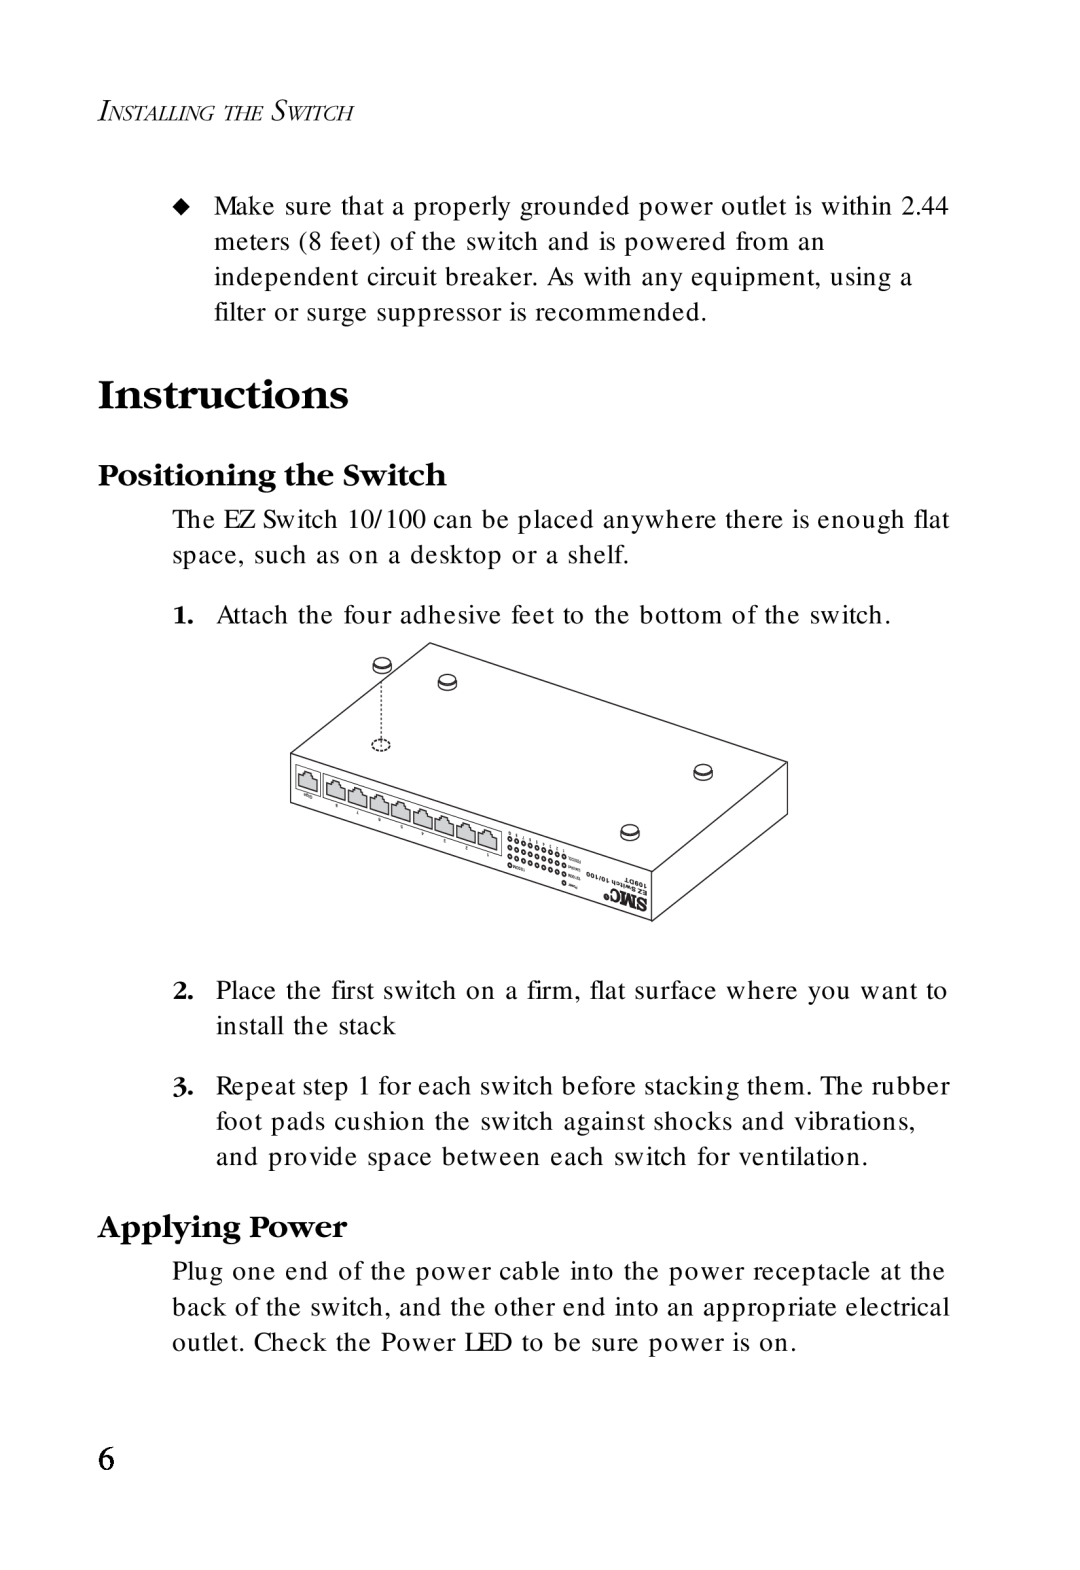 SMC Networks SMC-EZ1024DT manual Instructions, Positioning the Switch, Applying Power 